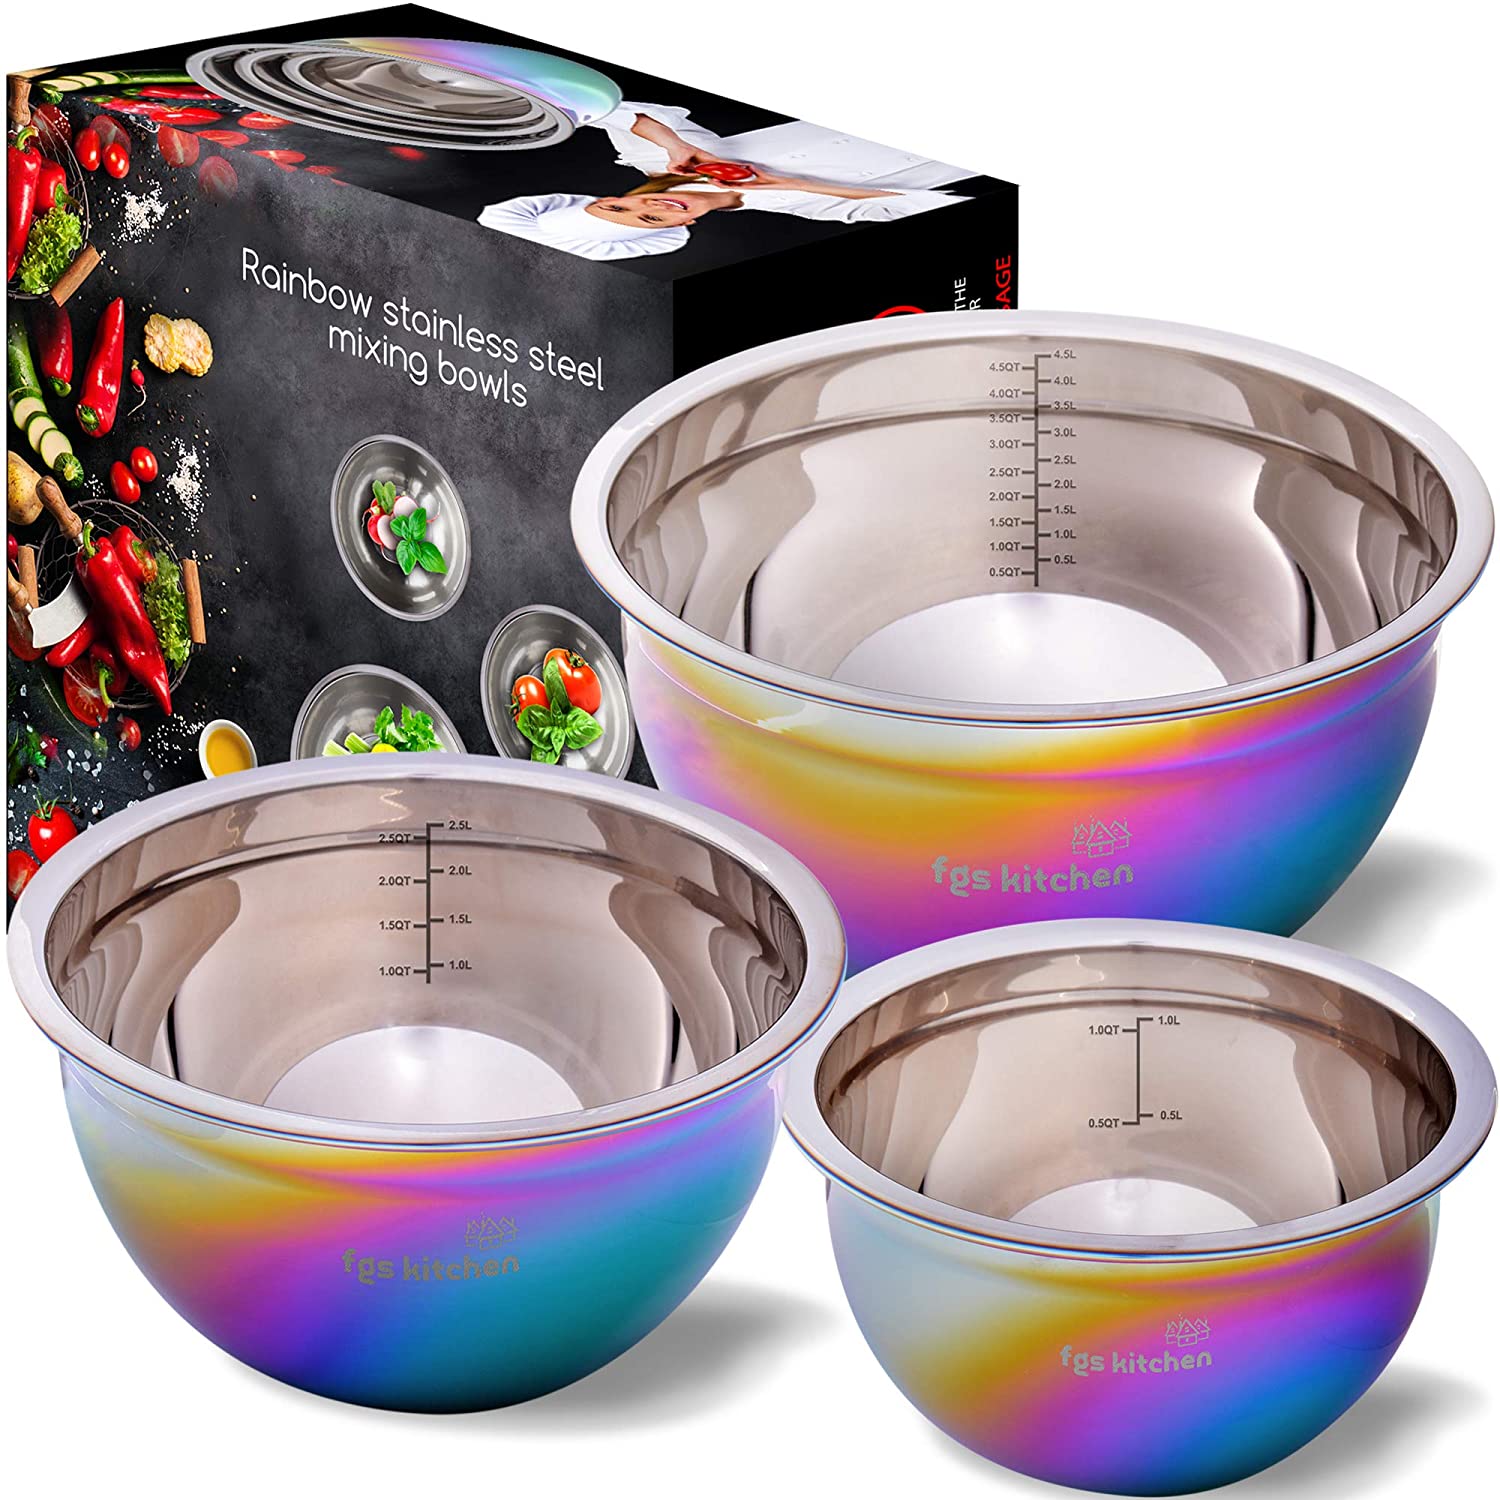 FGS Kitchen Rainbow Mixing Bowls – Set of 3 Colorful Nesting Stainless Steel Mixing Bowls